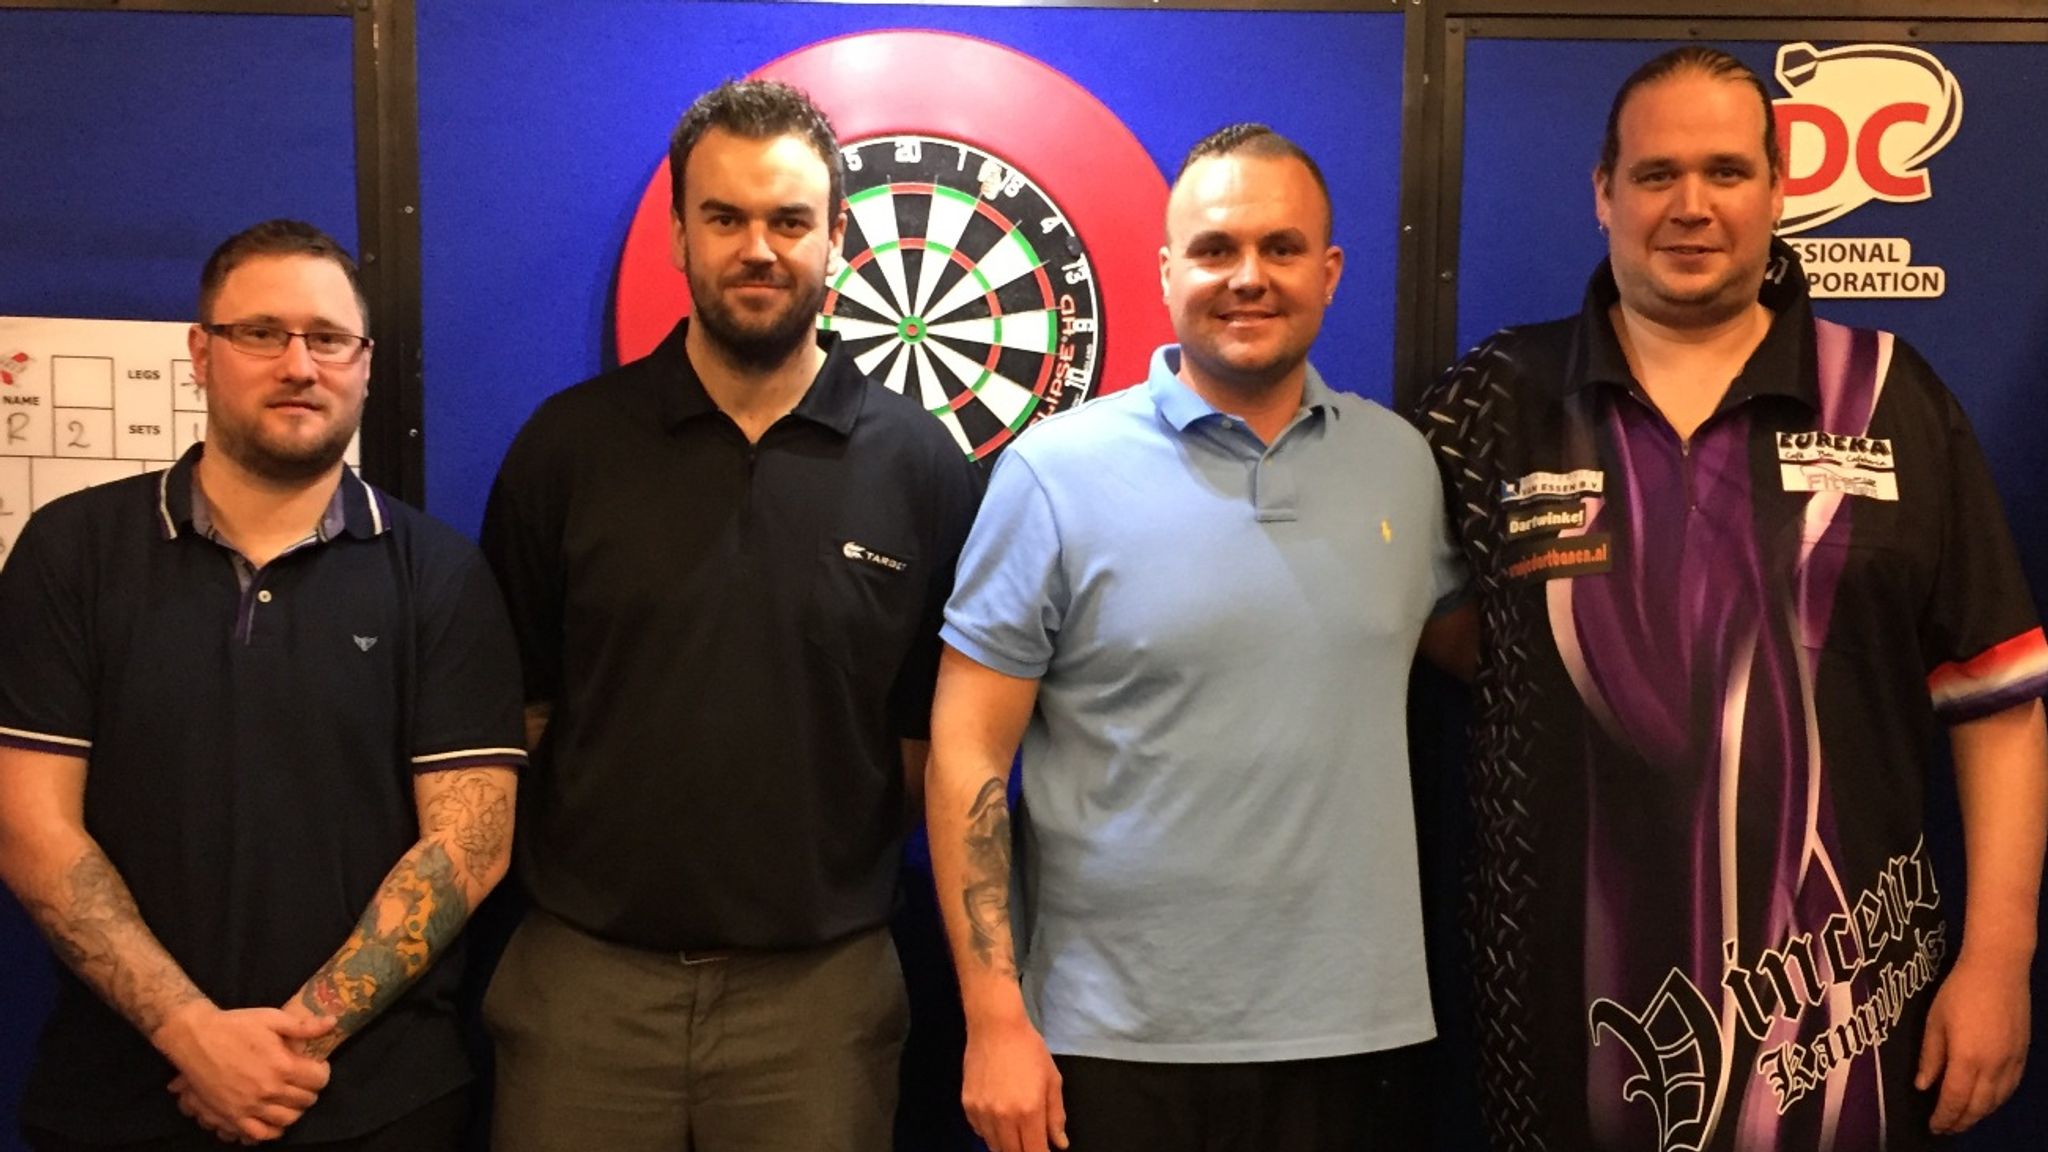 Final PDC Tour qualifiers are in Wigan | Darts News Sky Sports